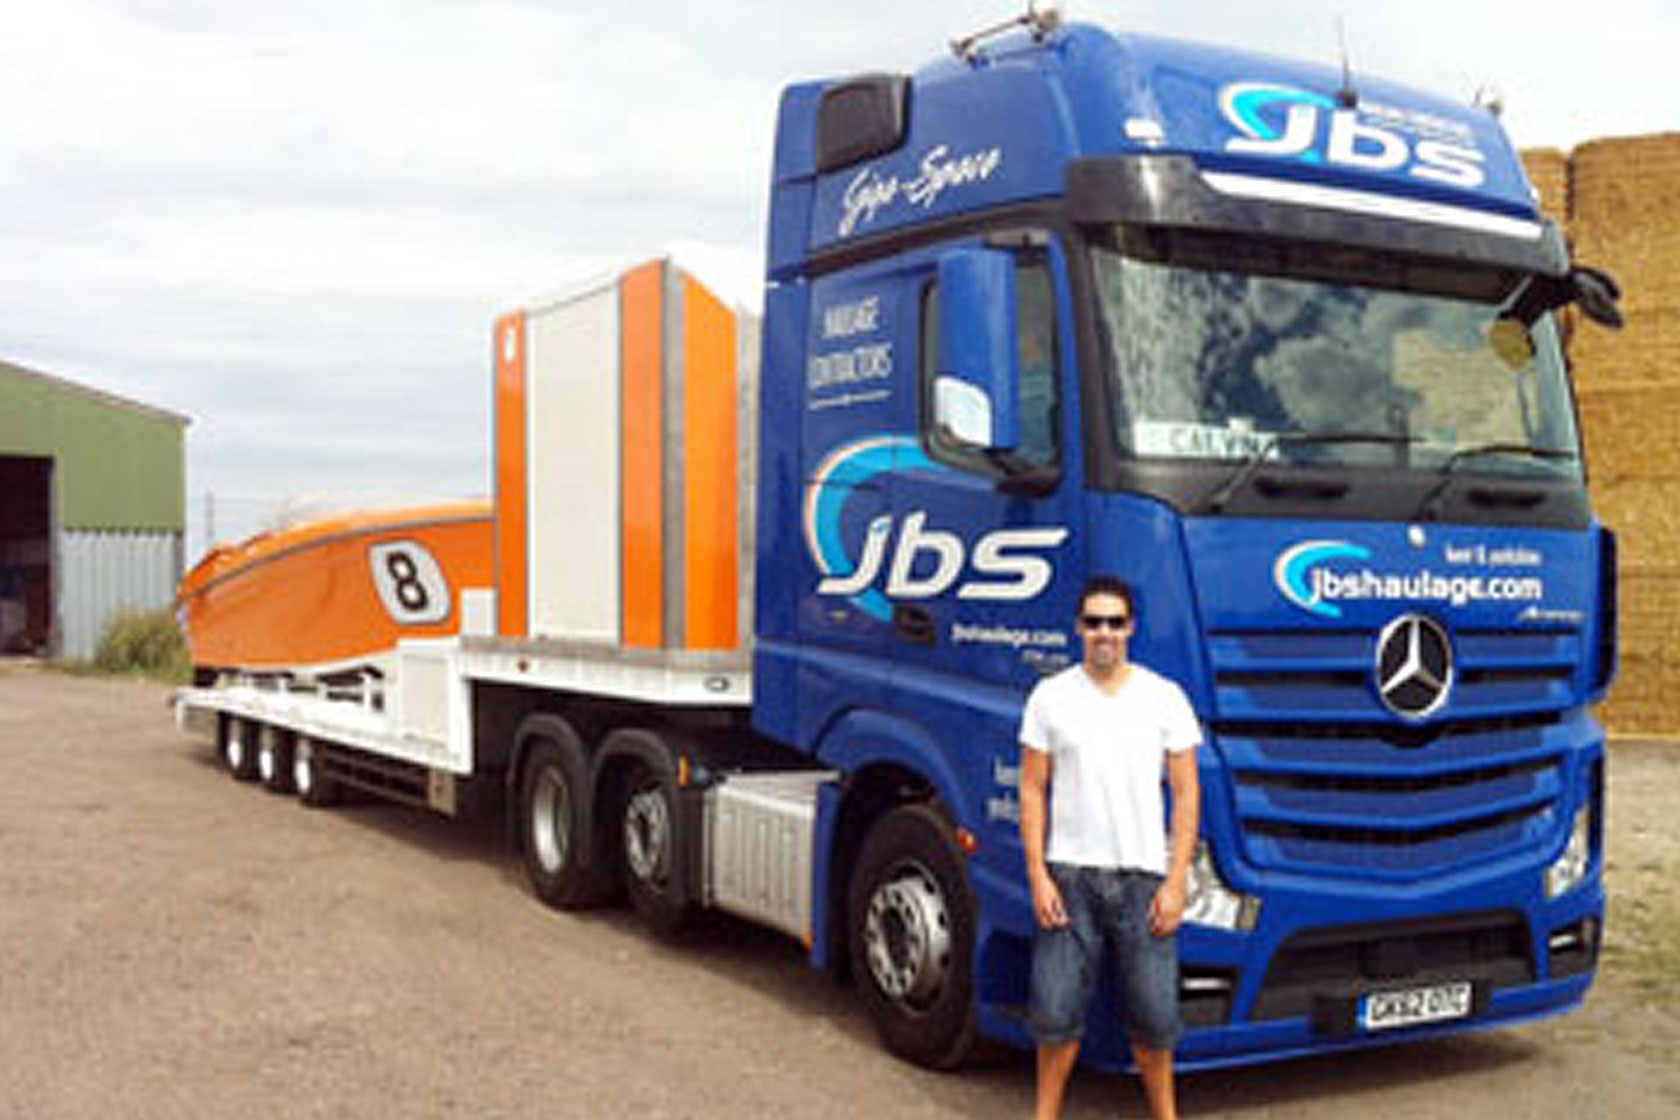 a photo of Calvin stood next to a. blue JBS truck that has a flatbed on it carrying a speedboat 